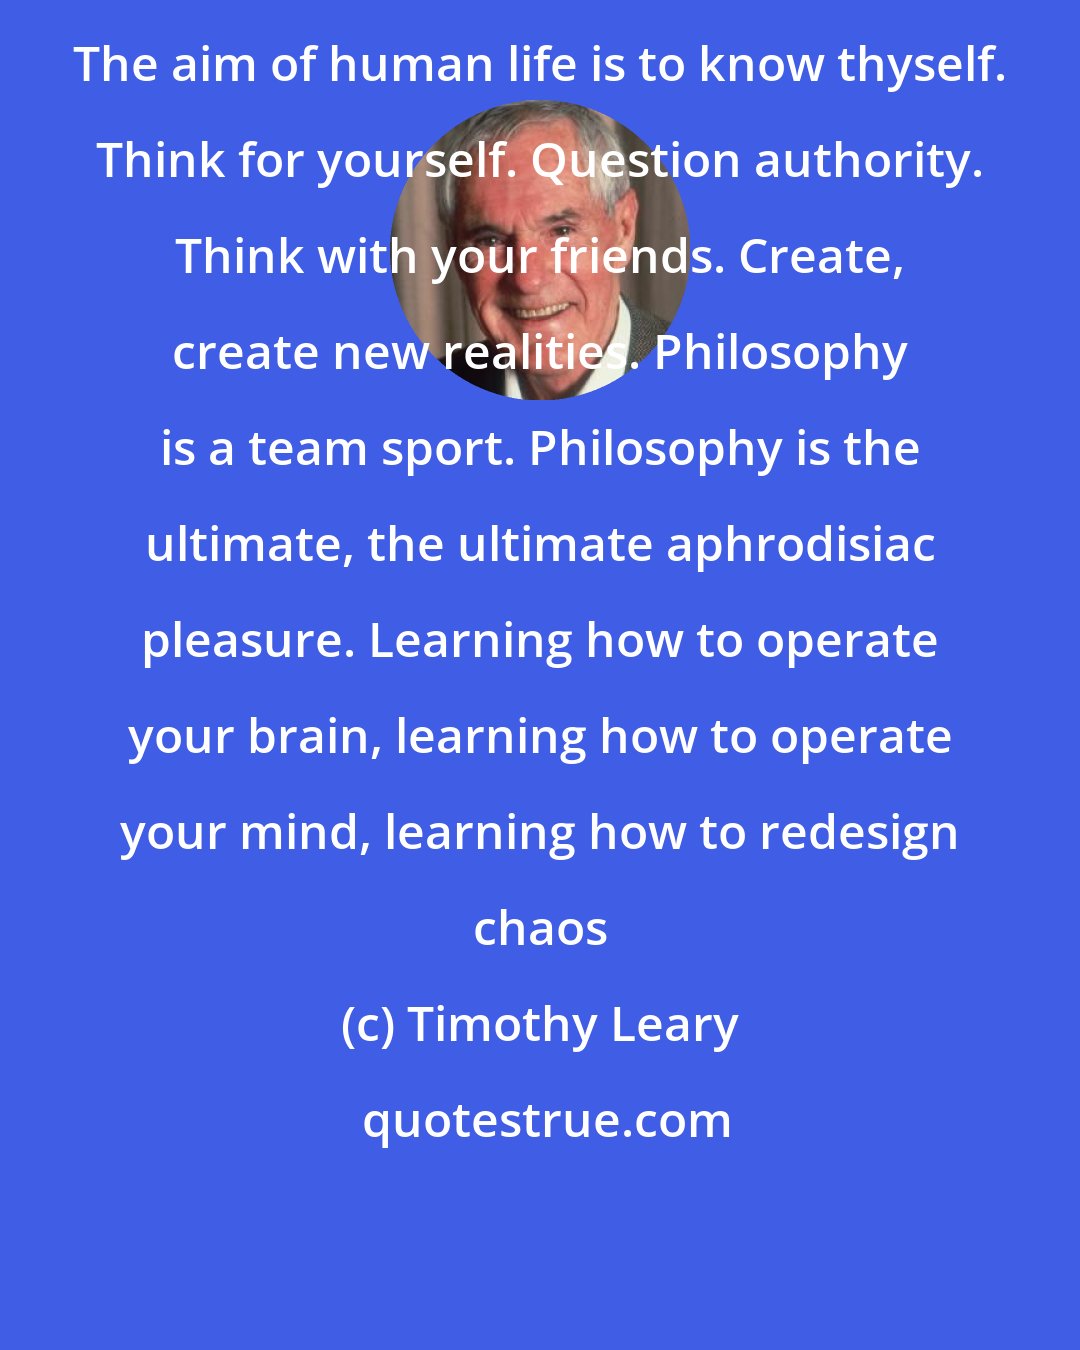 Timothy Leary: The aim of human life is to know thyself. Think for yourself. Question authority. Think with your friends. Create, create new realities. Philosophy is a team sport. Philosophy is the ultimate, the ultimate aphrodisiac pleasure. Learning how to operate your brain, learning how to operate your mind, learning how to redesign chaos